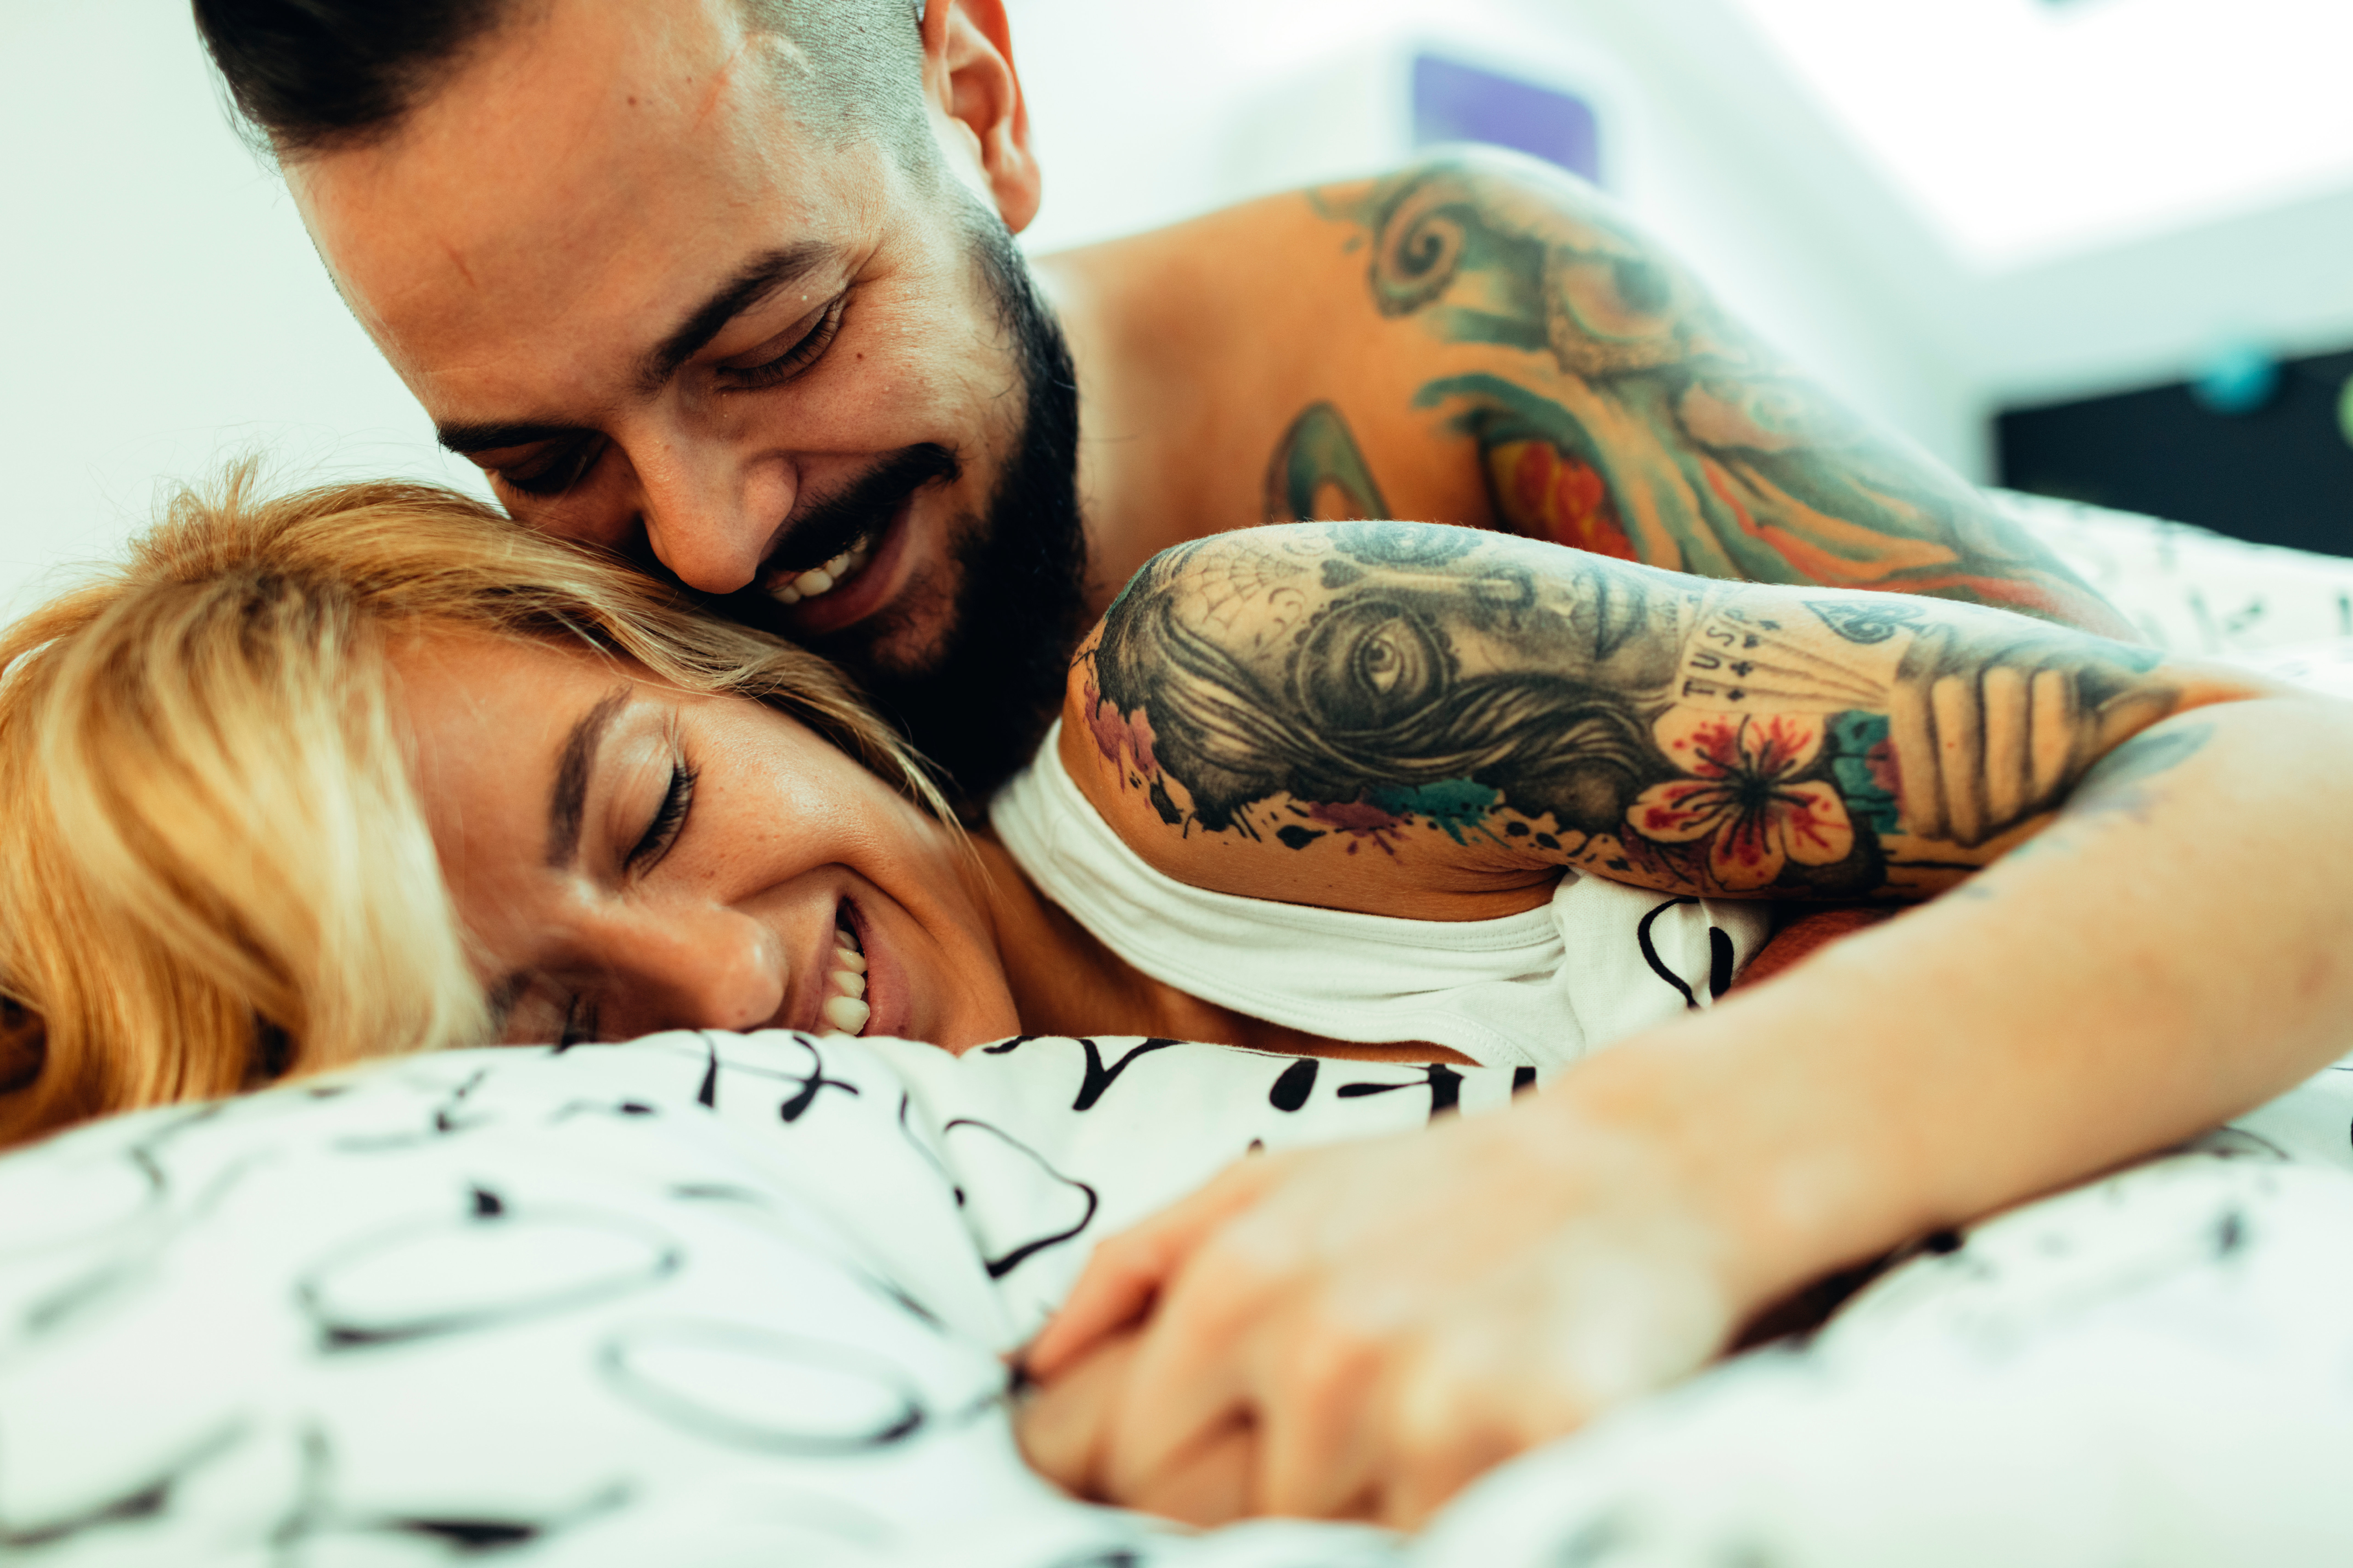 Revealed The Amount Of Time Sex Lasts For The Average British Couple HuffPost UK Life